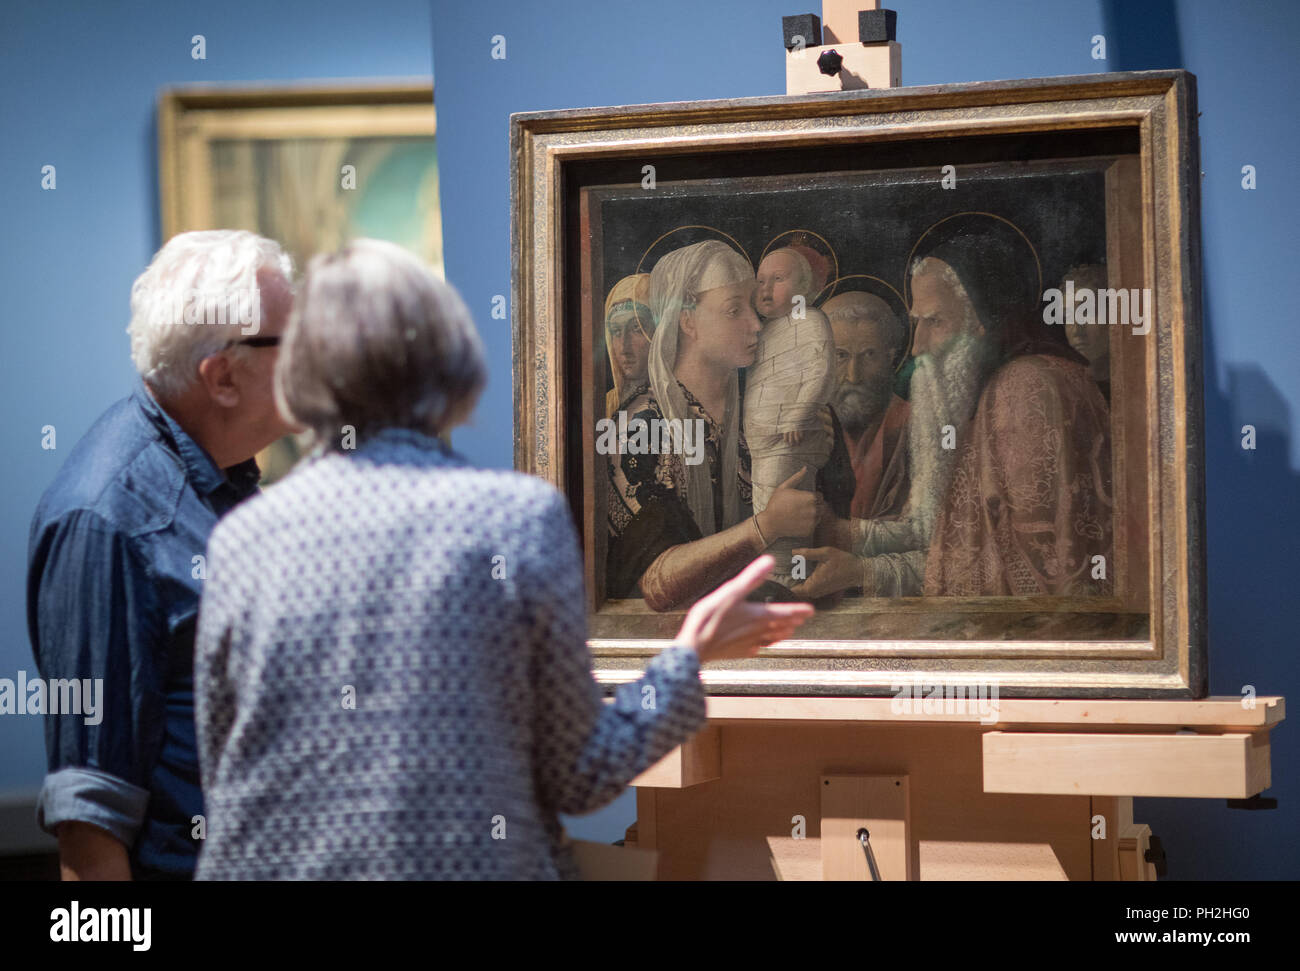 30.08.2018, Berlin: Participants of a press conference stand in front of Andrea Mantegna's painting 'The Presentation of Christ in the Temple' (c. 1453) in the collection of paintings of the National Museums in Berlin. The pictures are being prepared for transport to an exhibition in London. A press conference will provide information about the exhibition planned in Berlin and London on the work of the two Renaissance artists Giovanni Bellini (c. 1435-1516) and Andrea Mantegna (c. 1431-1506). For the show, the National Museums in Berlin and the National Gallery in London are cooperating with t Stock Photo